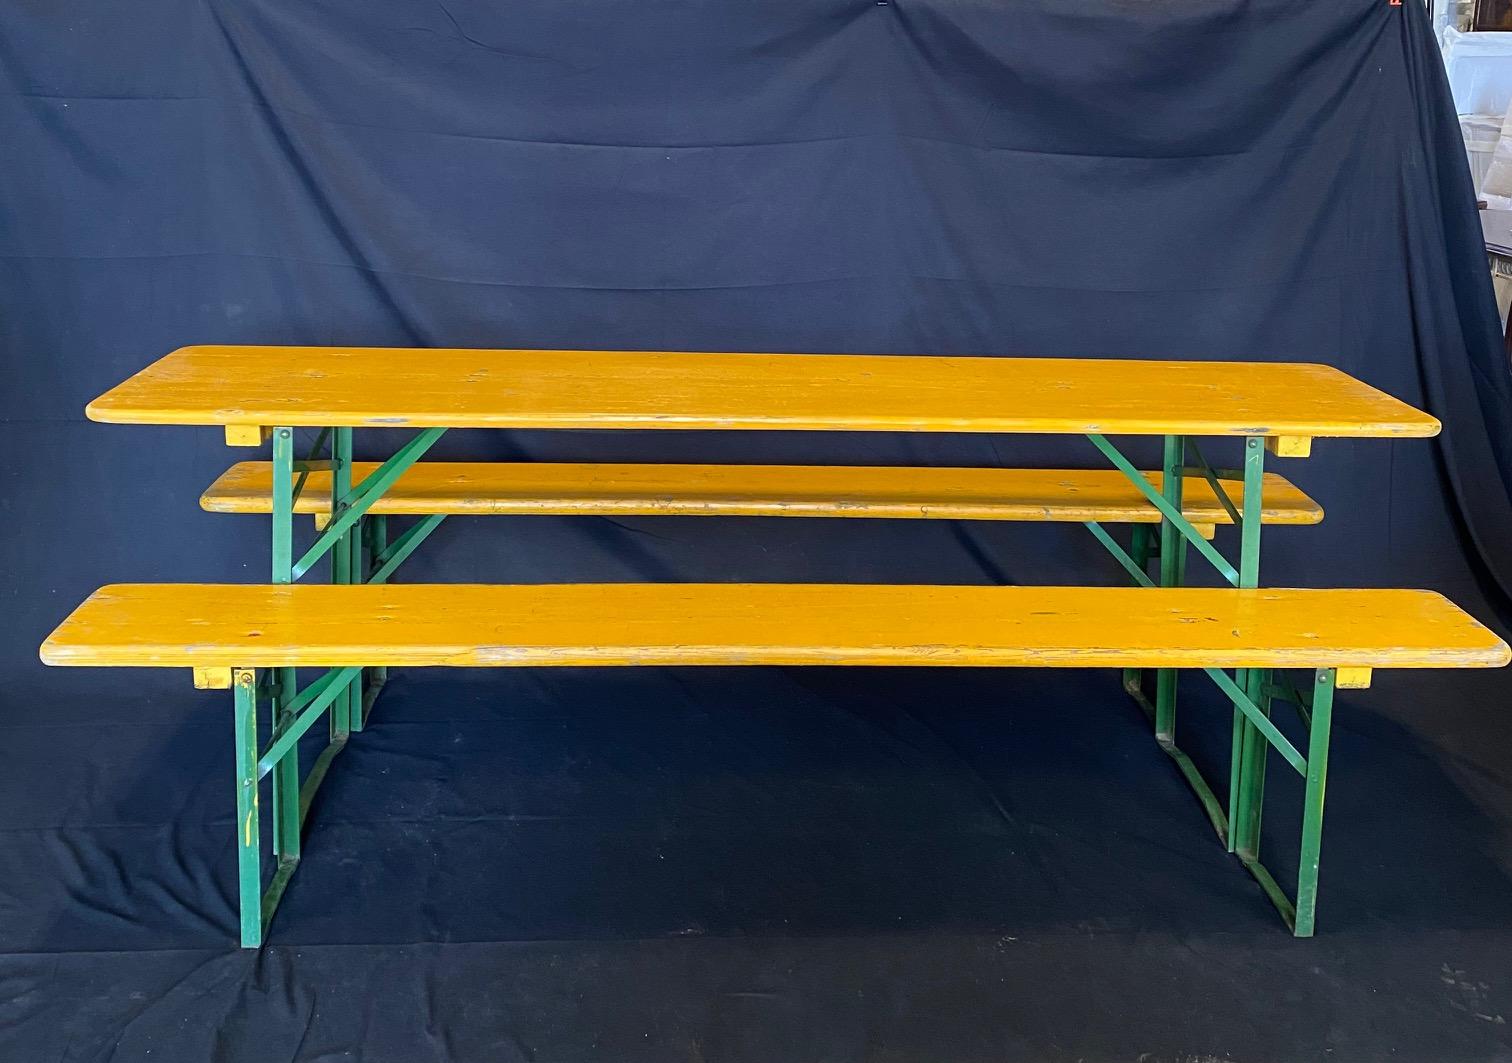 Vintage collapsible German beer garden table and bench set, consisting of a folding table and two folding benches with original paint. Great size and color, very sturdy, show signs of use and wear, patina. Structurally sound, mechanics function